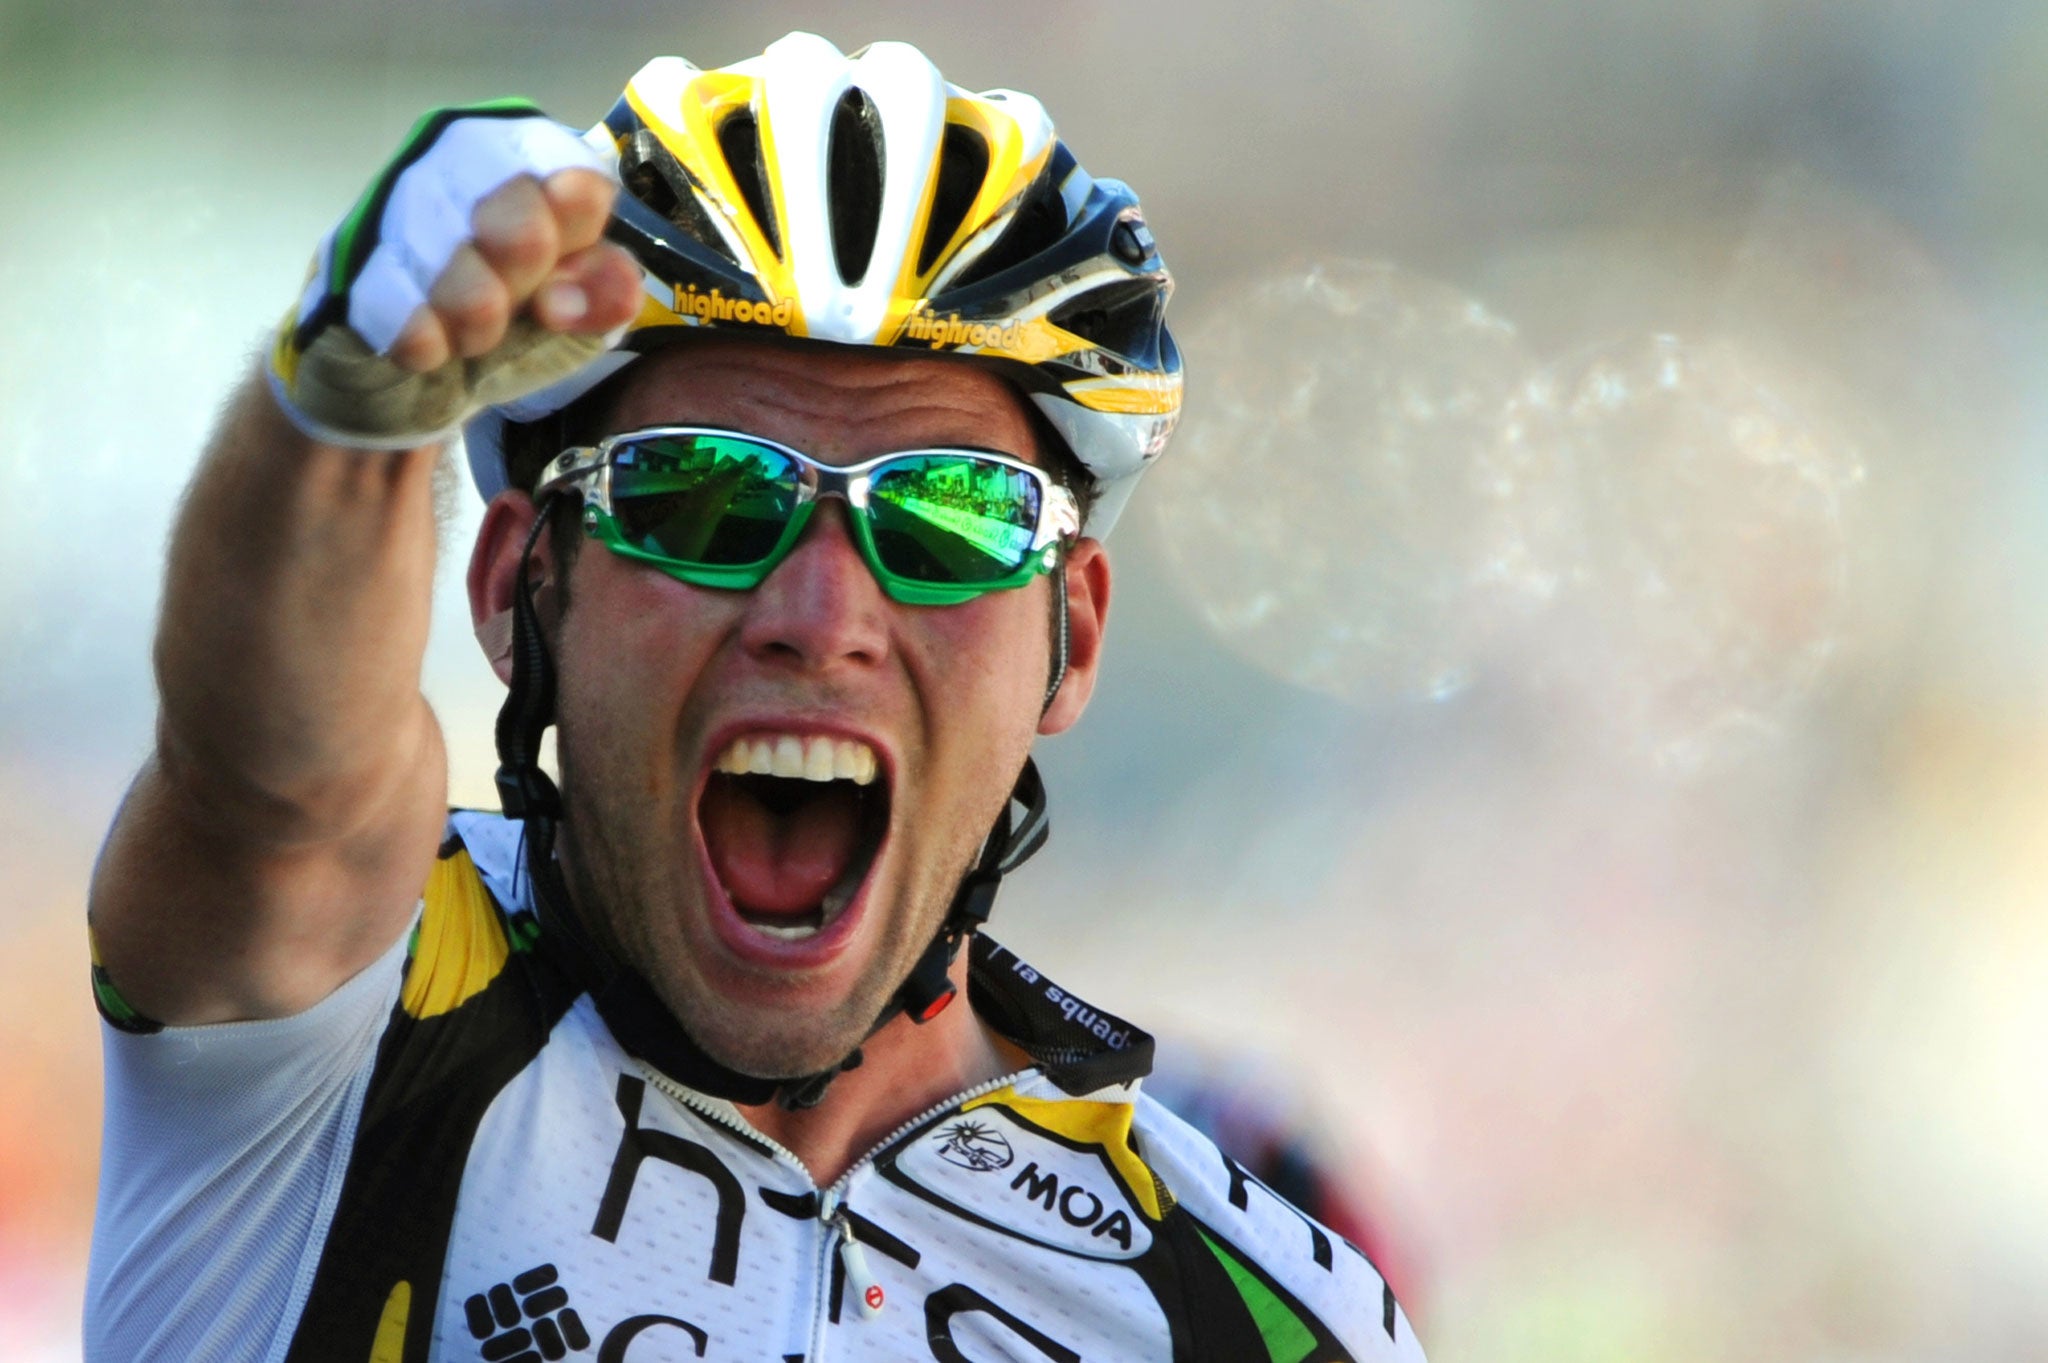 A growing army of cyclists follows in the wake of Mark Cavendish